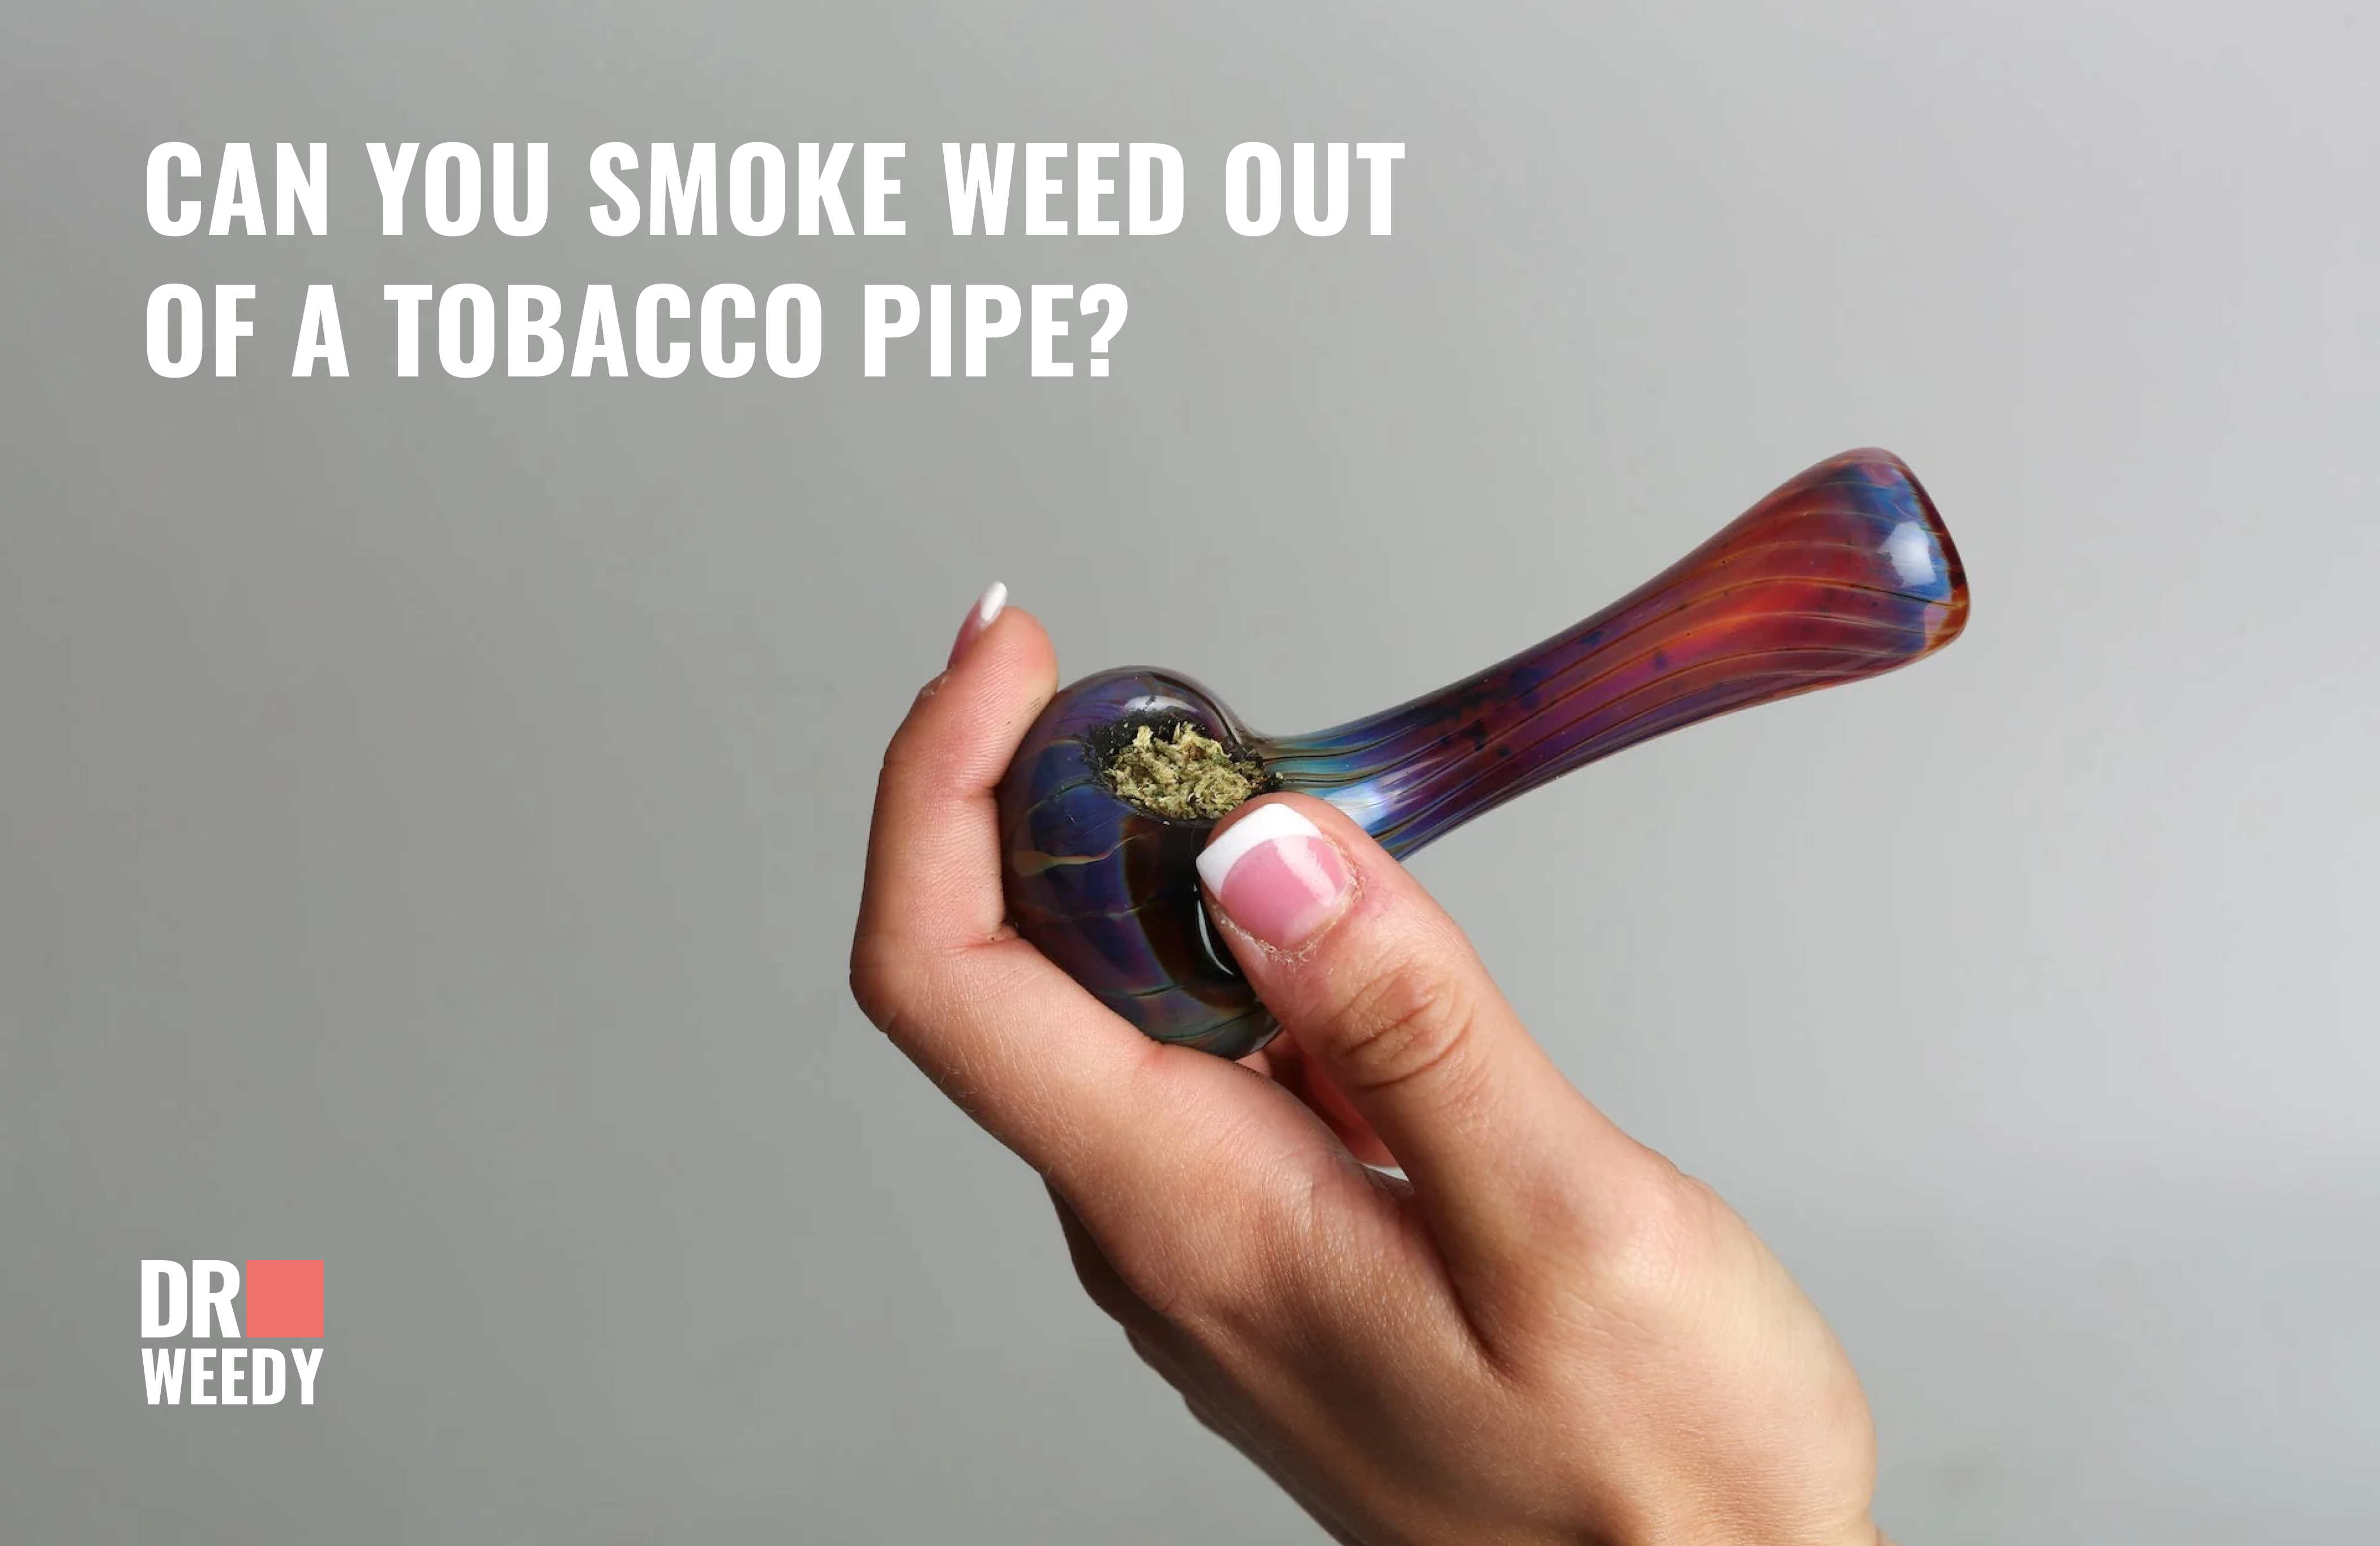 Can You Smoke Weed Out of a Tobacco Pipe?